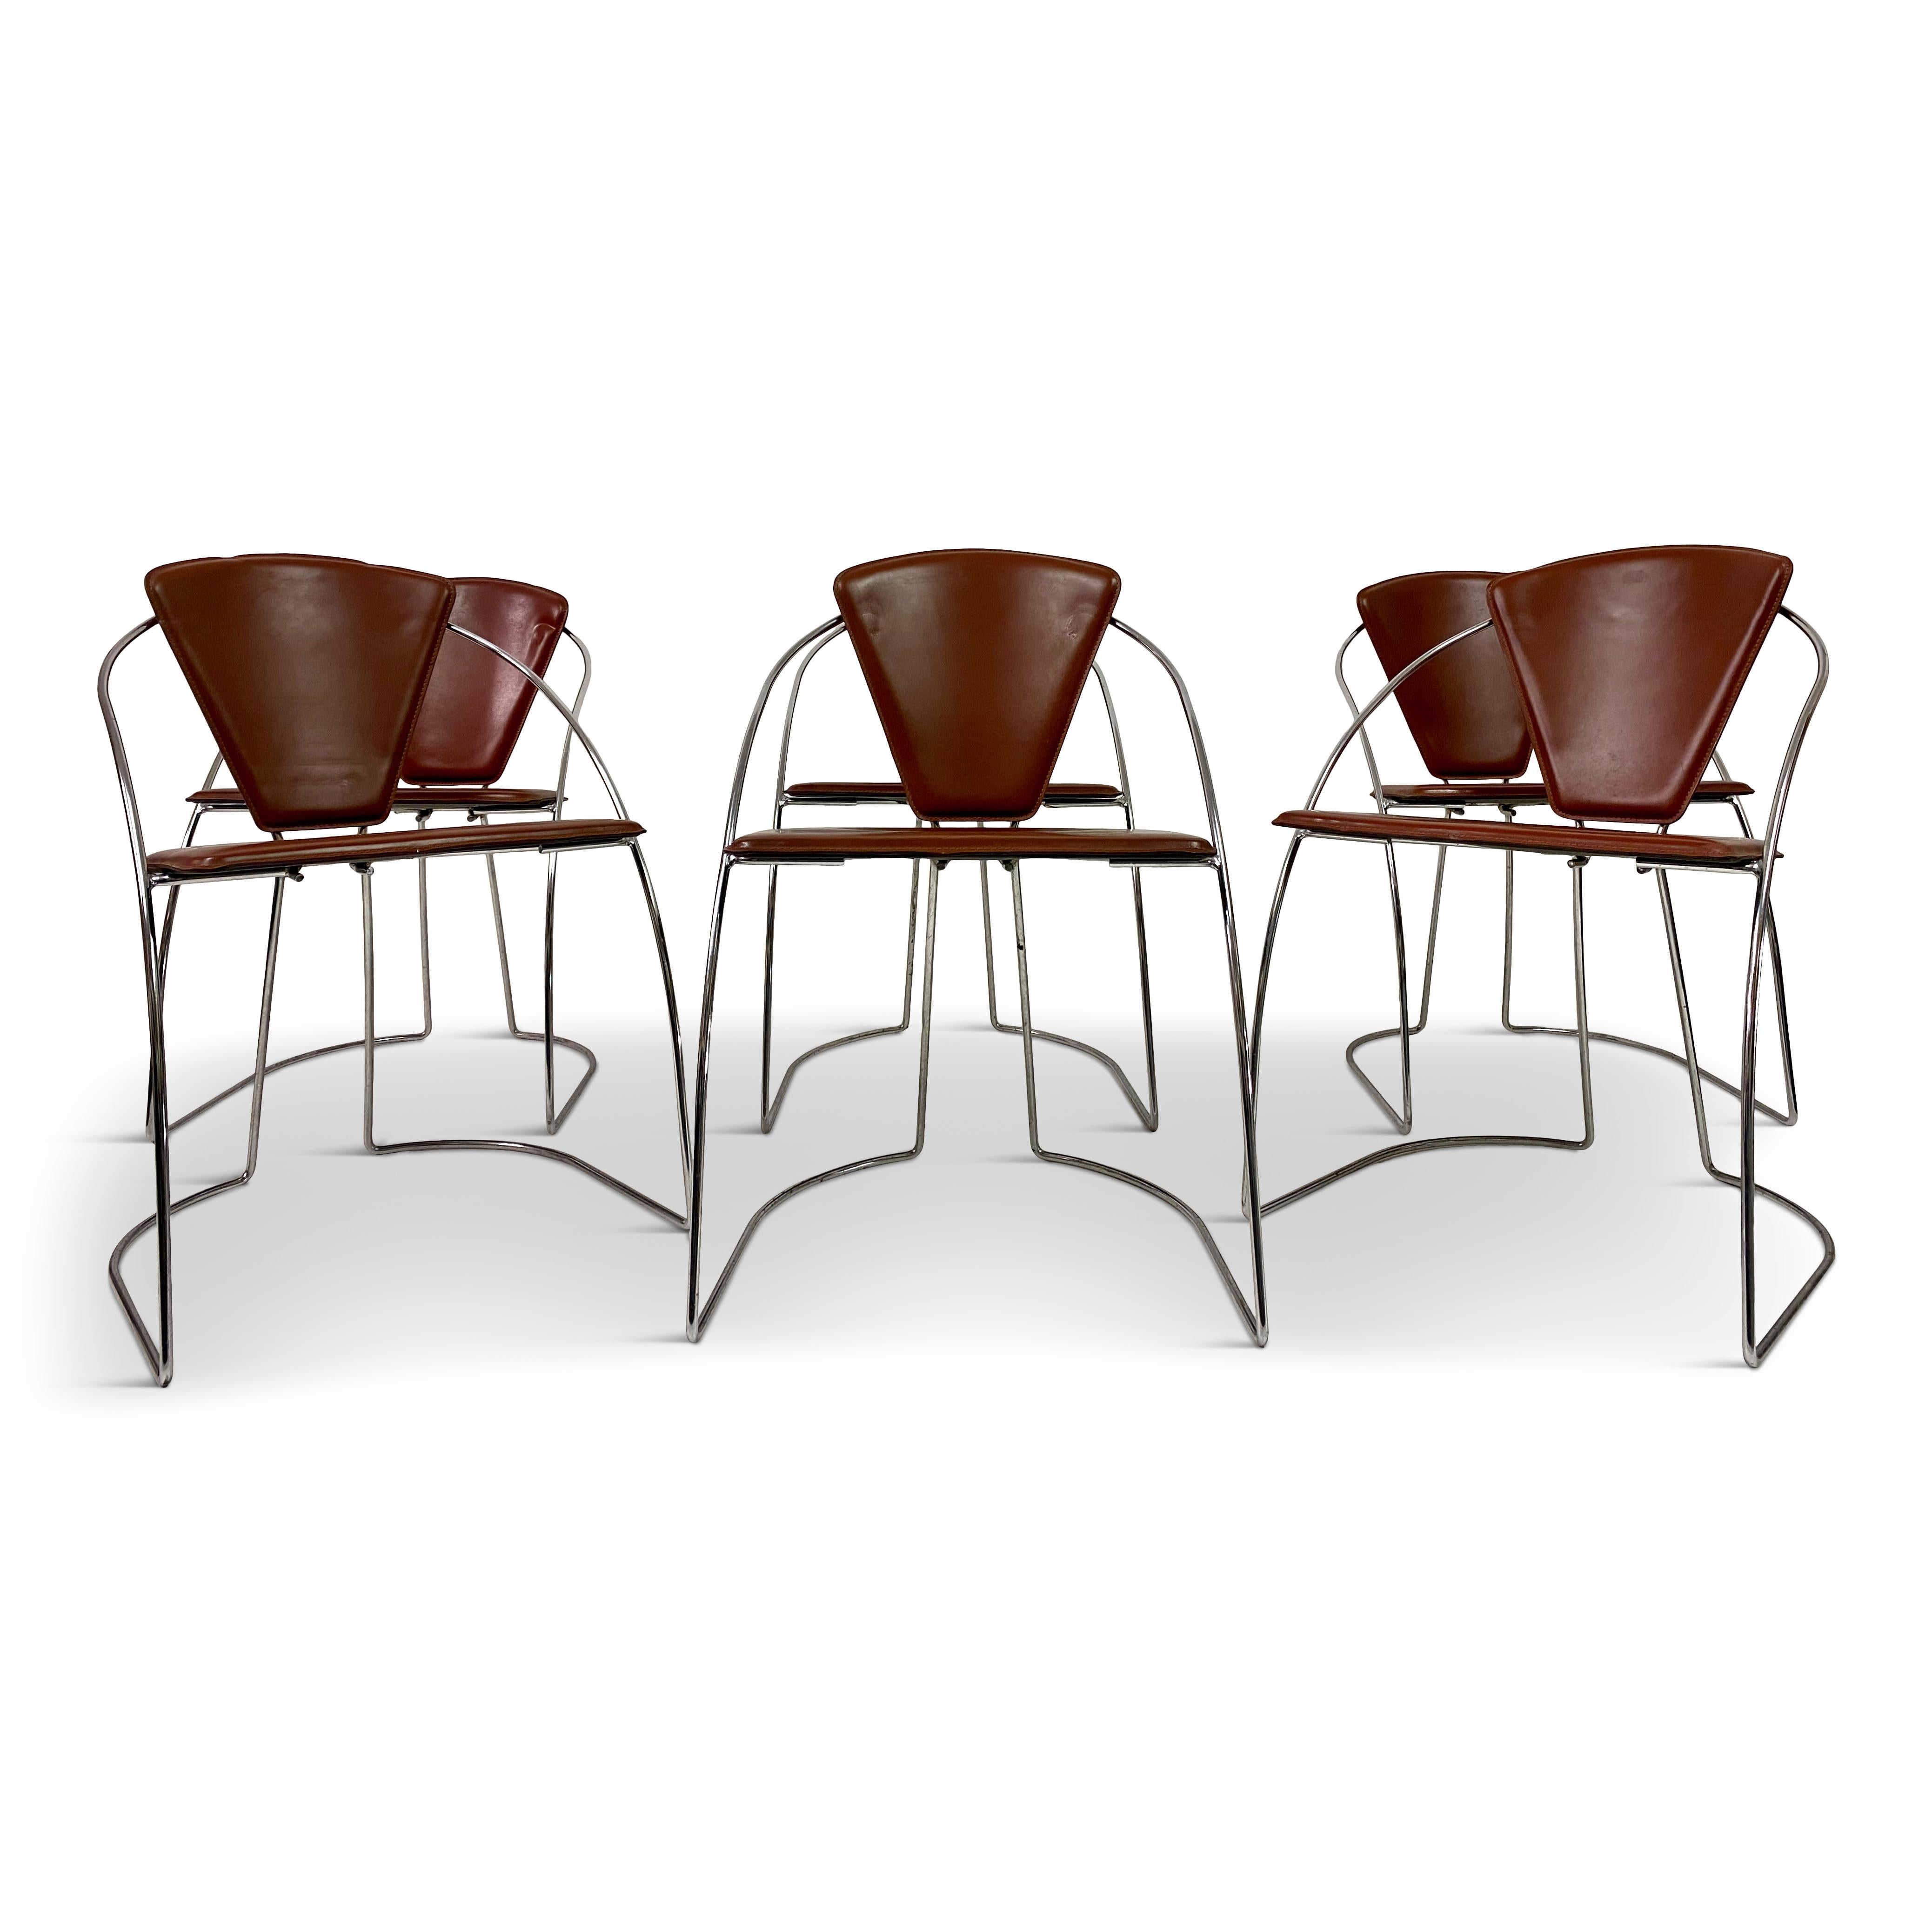 Six dining chairs

Chromed steel tubular frames

Red leather seats and back

Postmodern style

Italy, 1980s.